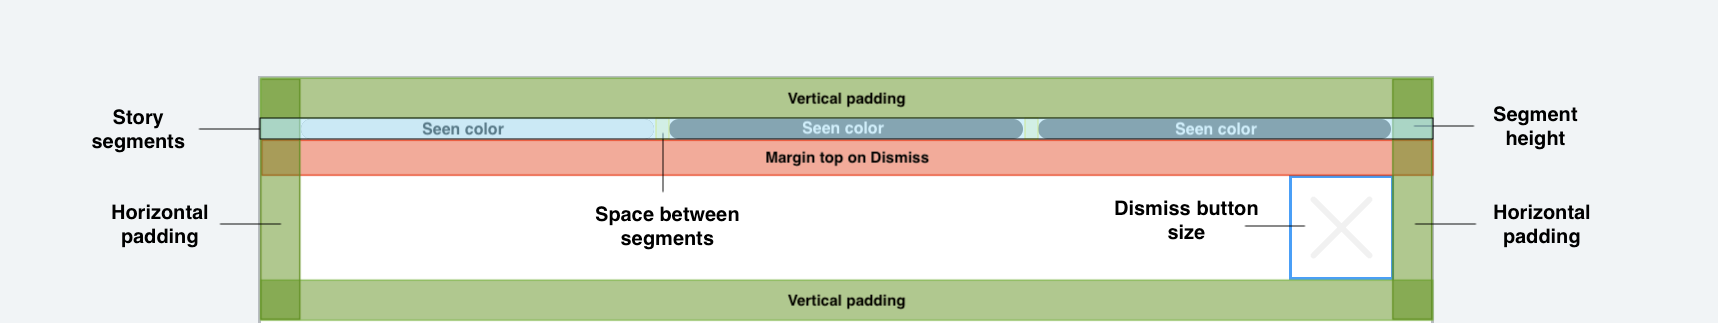 Illustration of the visual aspects of the Story settings that can be customized, with labels indicating the size and positioning of the Story segments and dismiss button. 